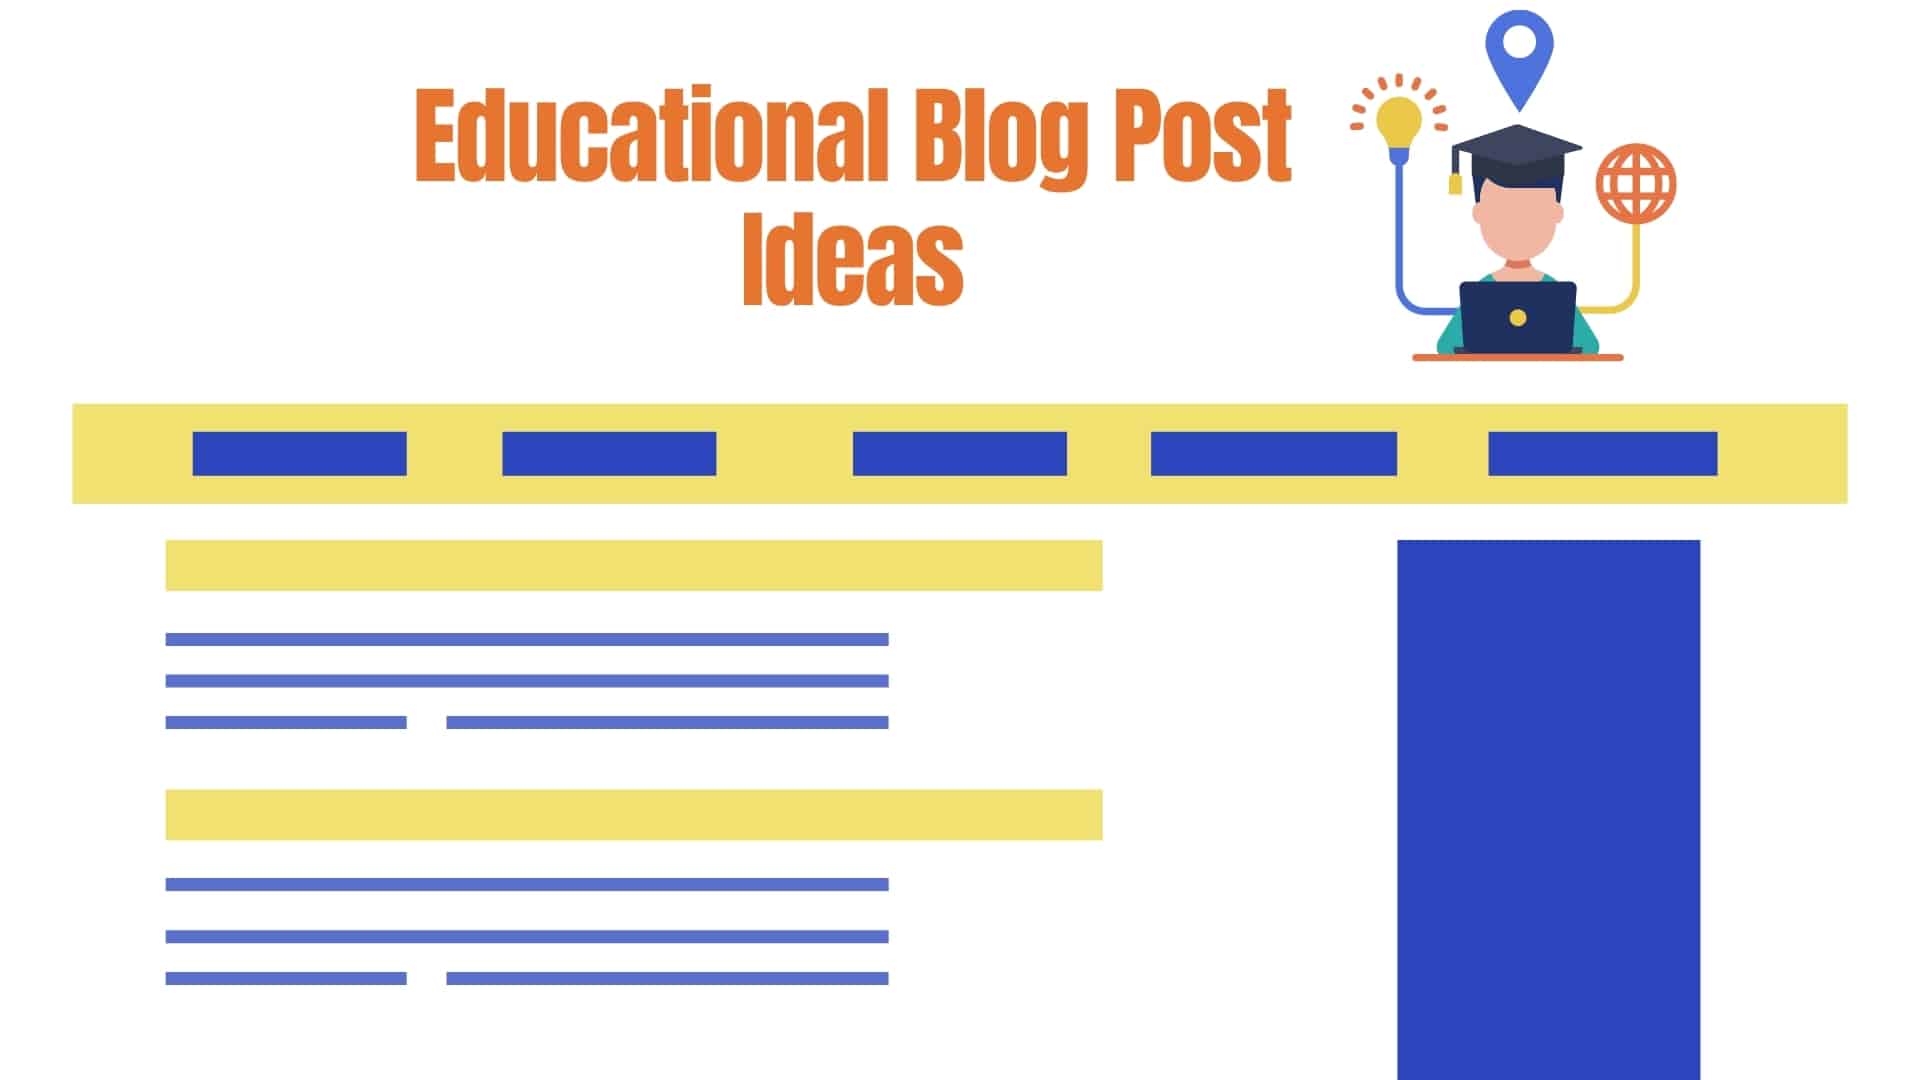 Educational Blog Post Ideas - Find Informational Blog Topic Ideas and Blog Post Ideas to Write About